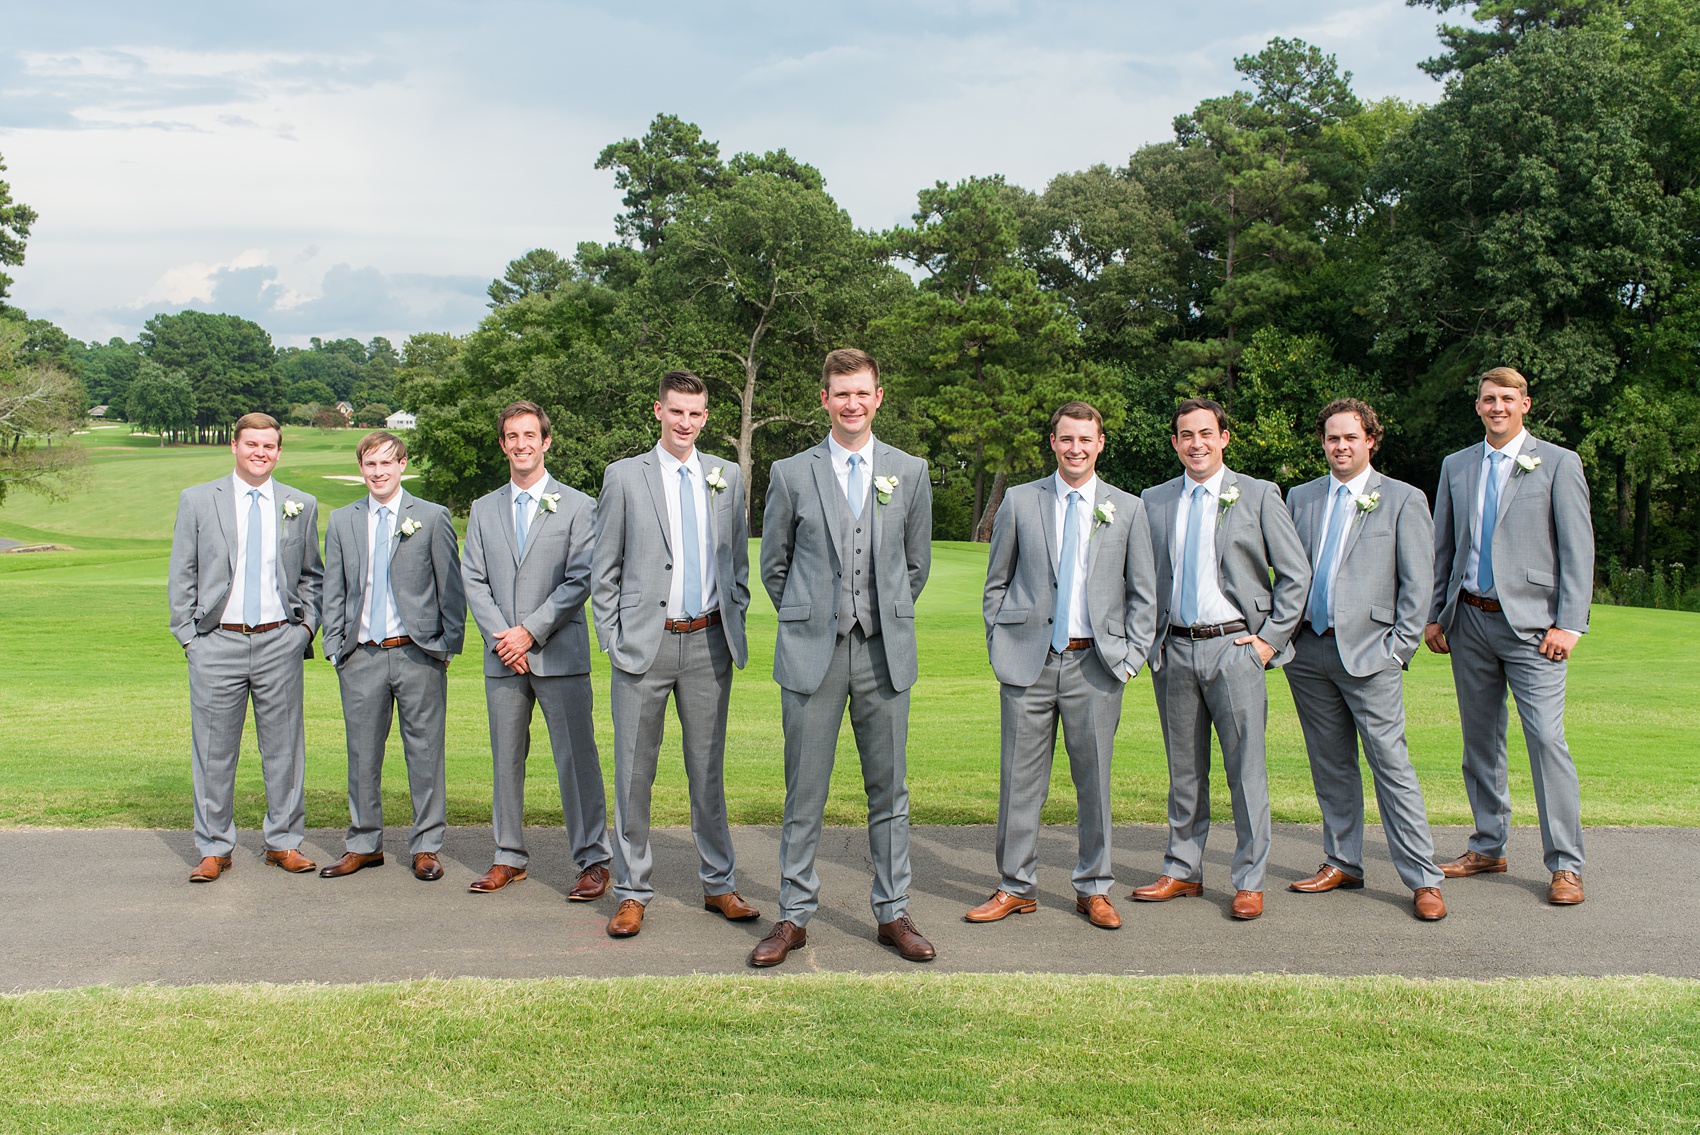 Pictures by Mikkel Paige Photography of a wedding in Durham, North Carolina. The groom wore a white rose boutonniere with grey suit and blue tie while for the garden-like golf course photos together. He gifted all his best friends unique socks for a special detail! Click through to the website post for complete inspiration! #durhamNC #northcarolinawedding #golfcoursewedding #CountryClub #DurhamWedding #summerwedding #groom #blueties #groomsmen #greysuits